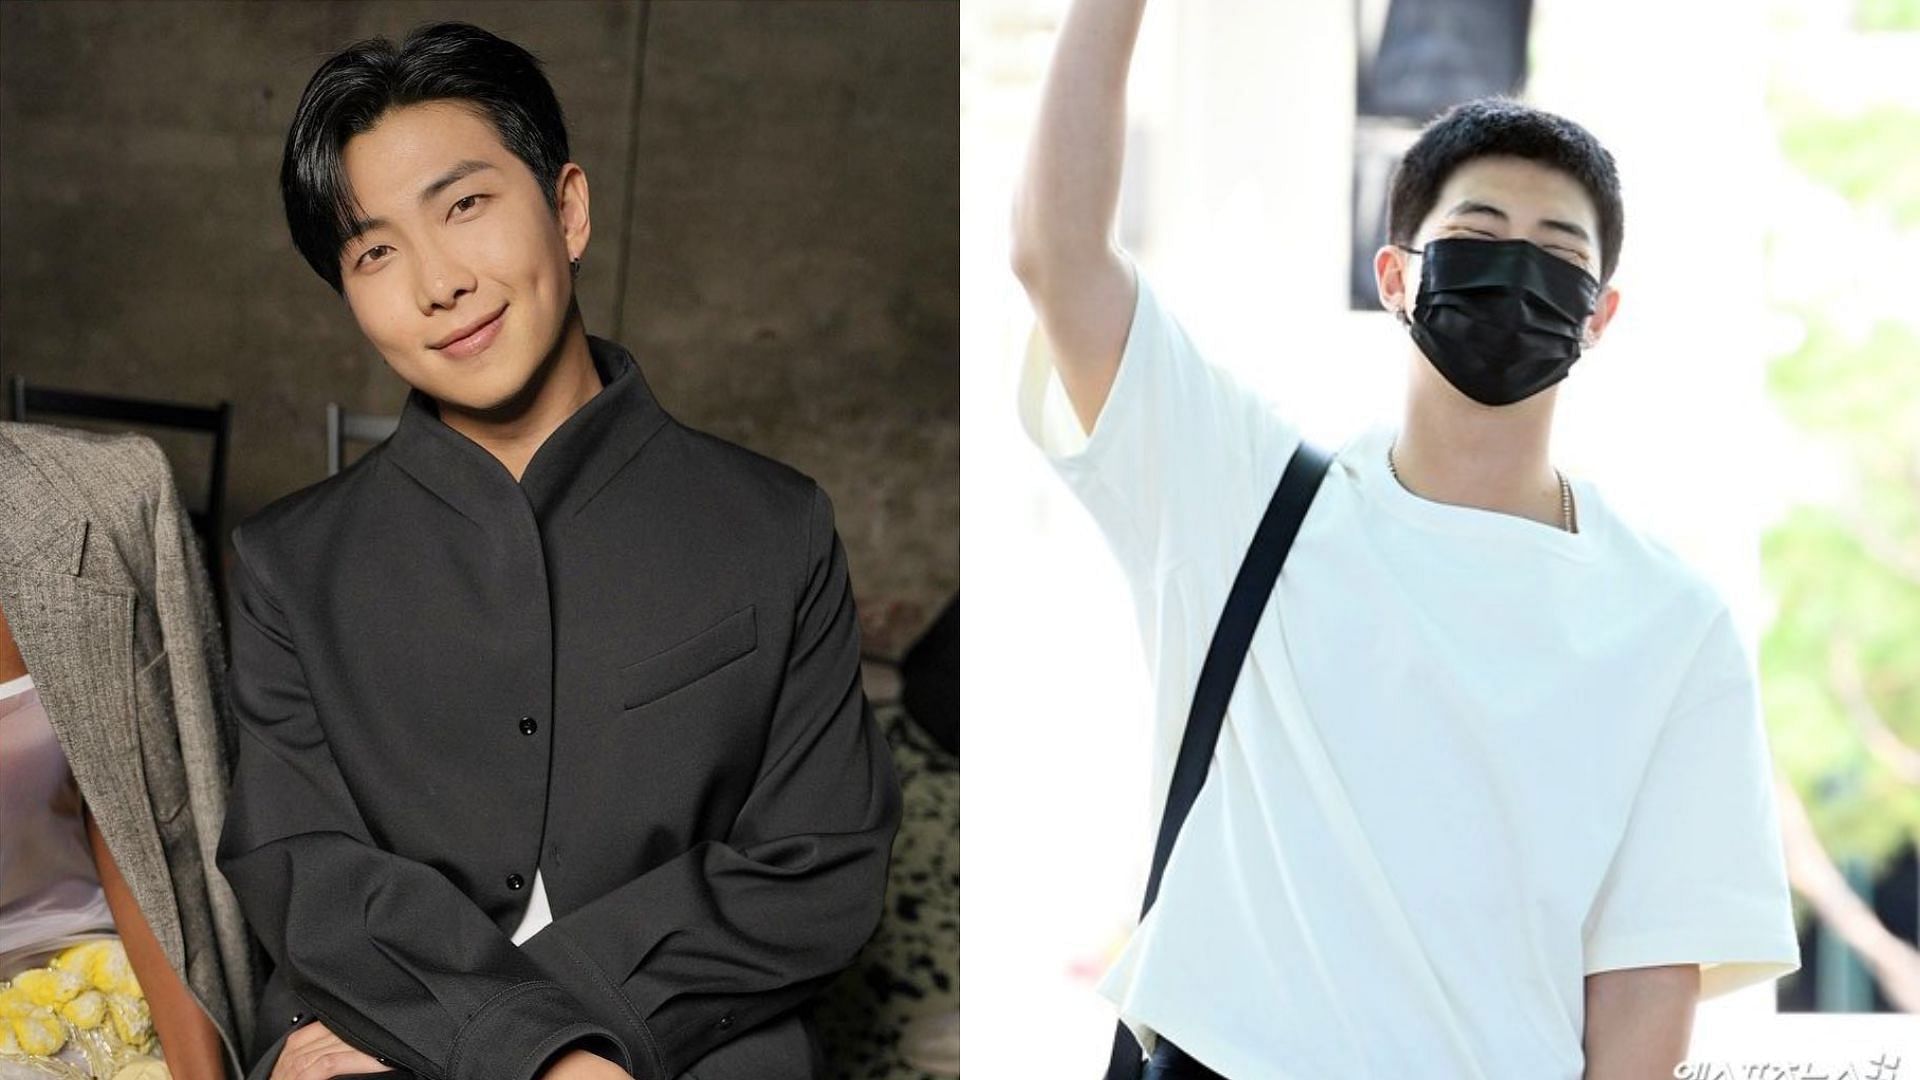 Namjoon and Bottega is a perfect match: BTS' RM's fans anticipate his  upcoming Bottega Veneta x GQ Project as he lands in Japan